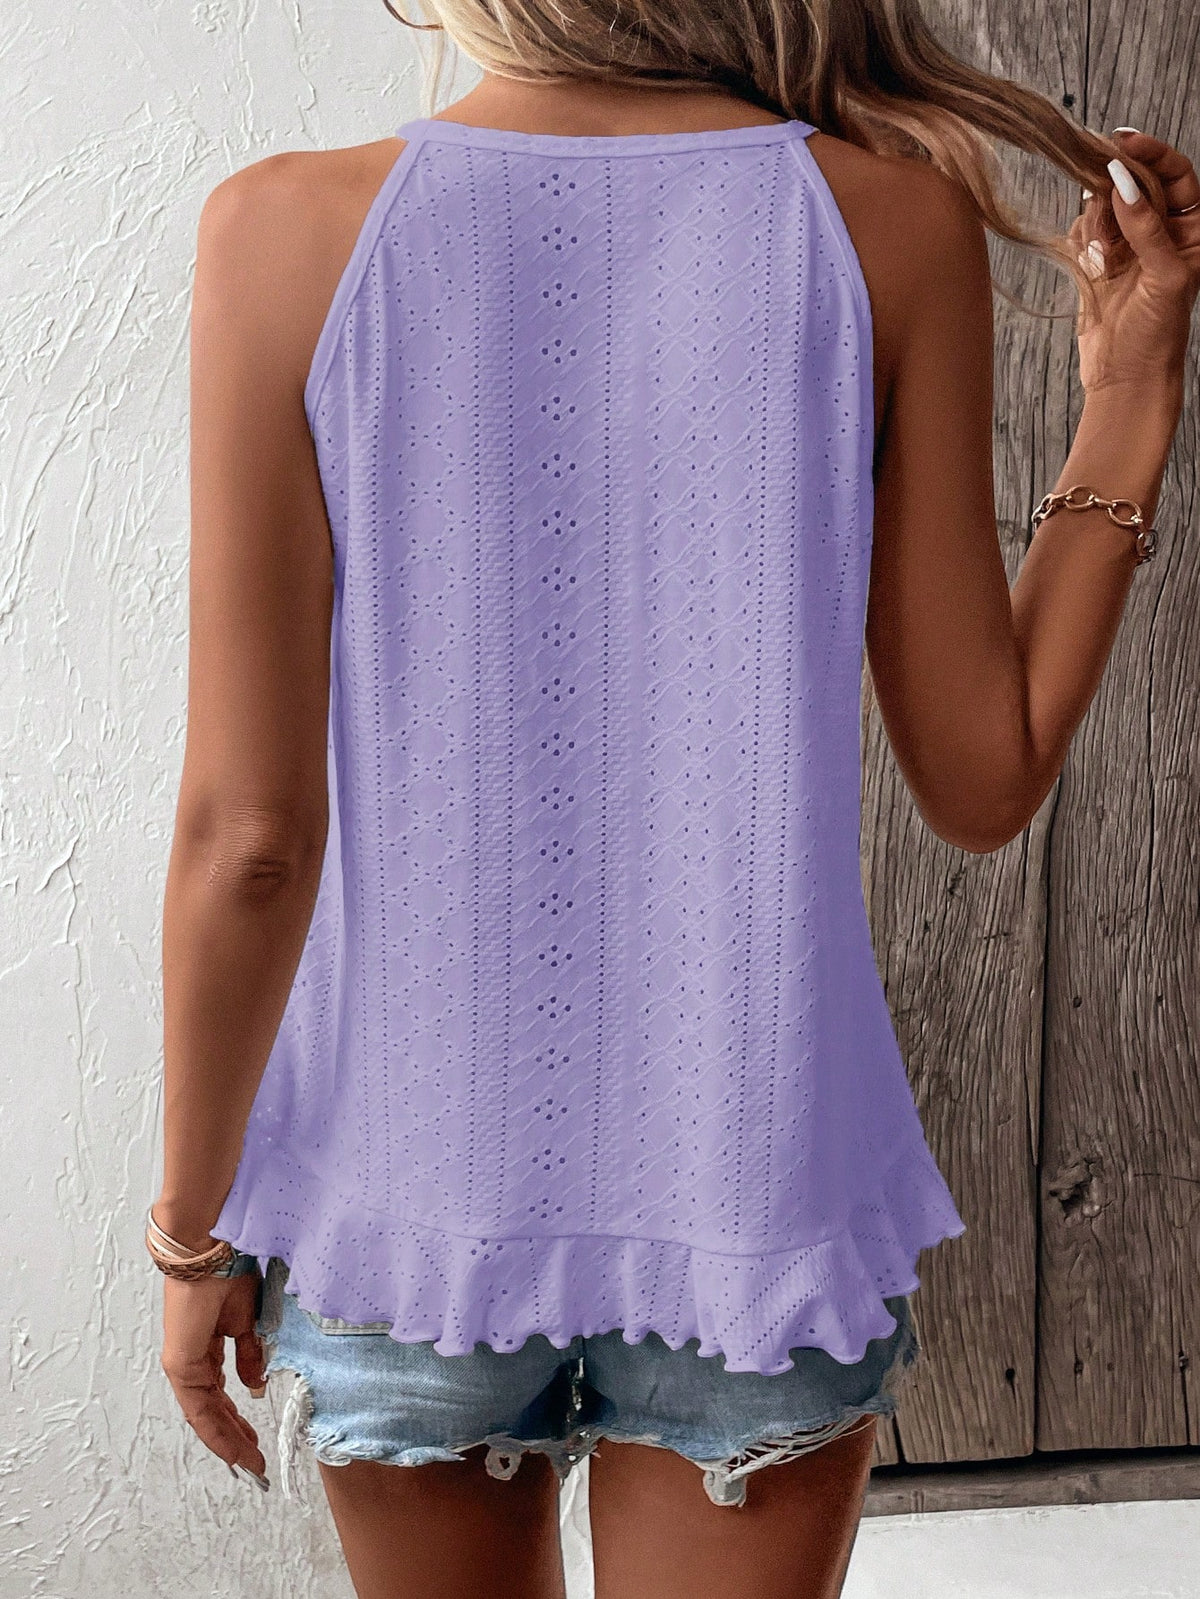 Eyelet Embroidery Halter Top with Ruffle Trim